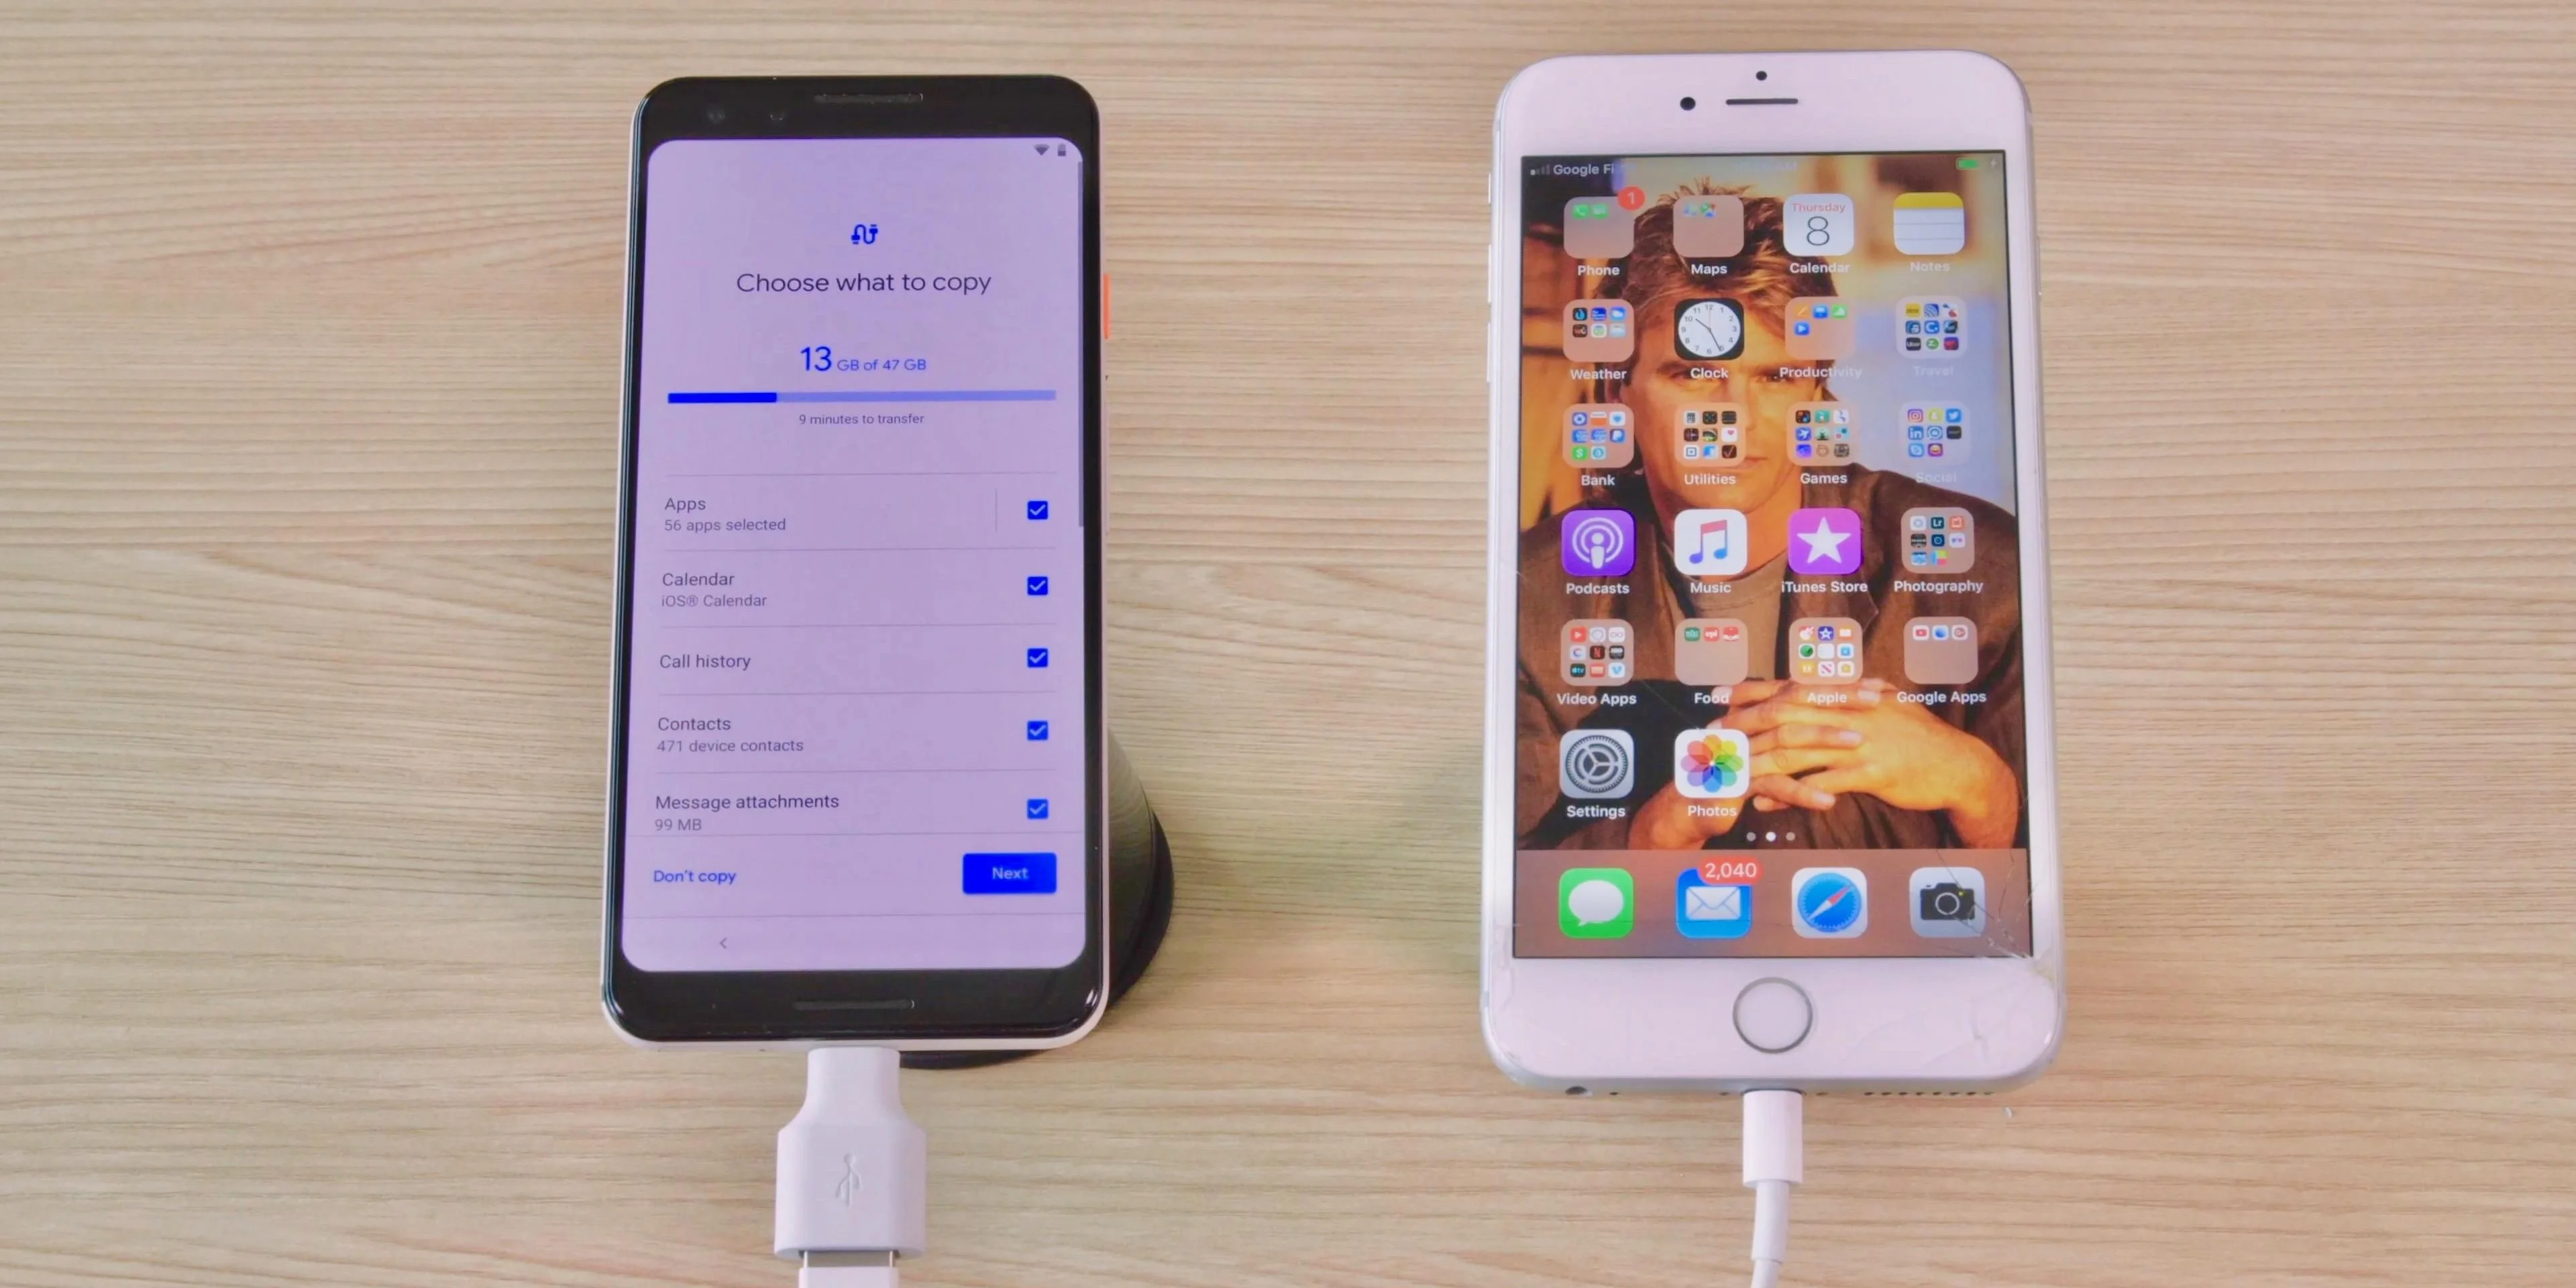 How to Transfer Data from iPhone to Android: The easiest way to do this